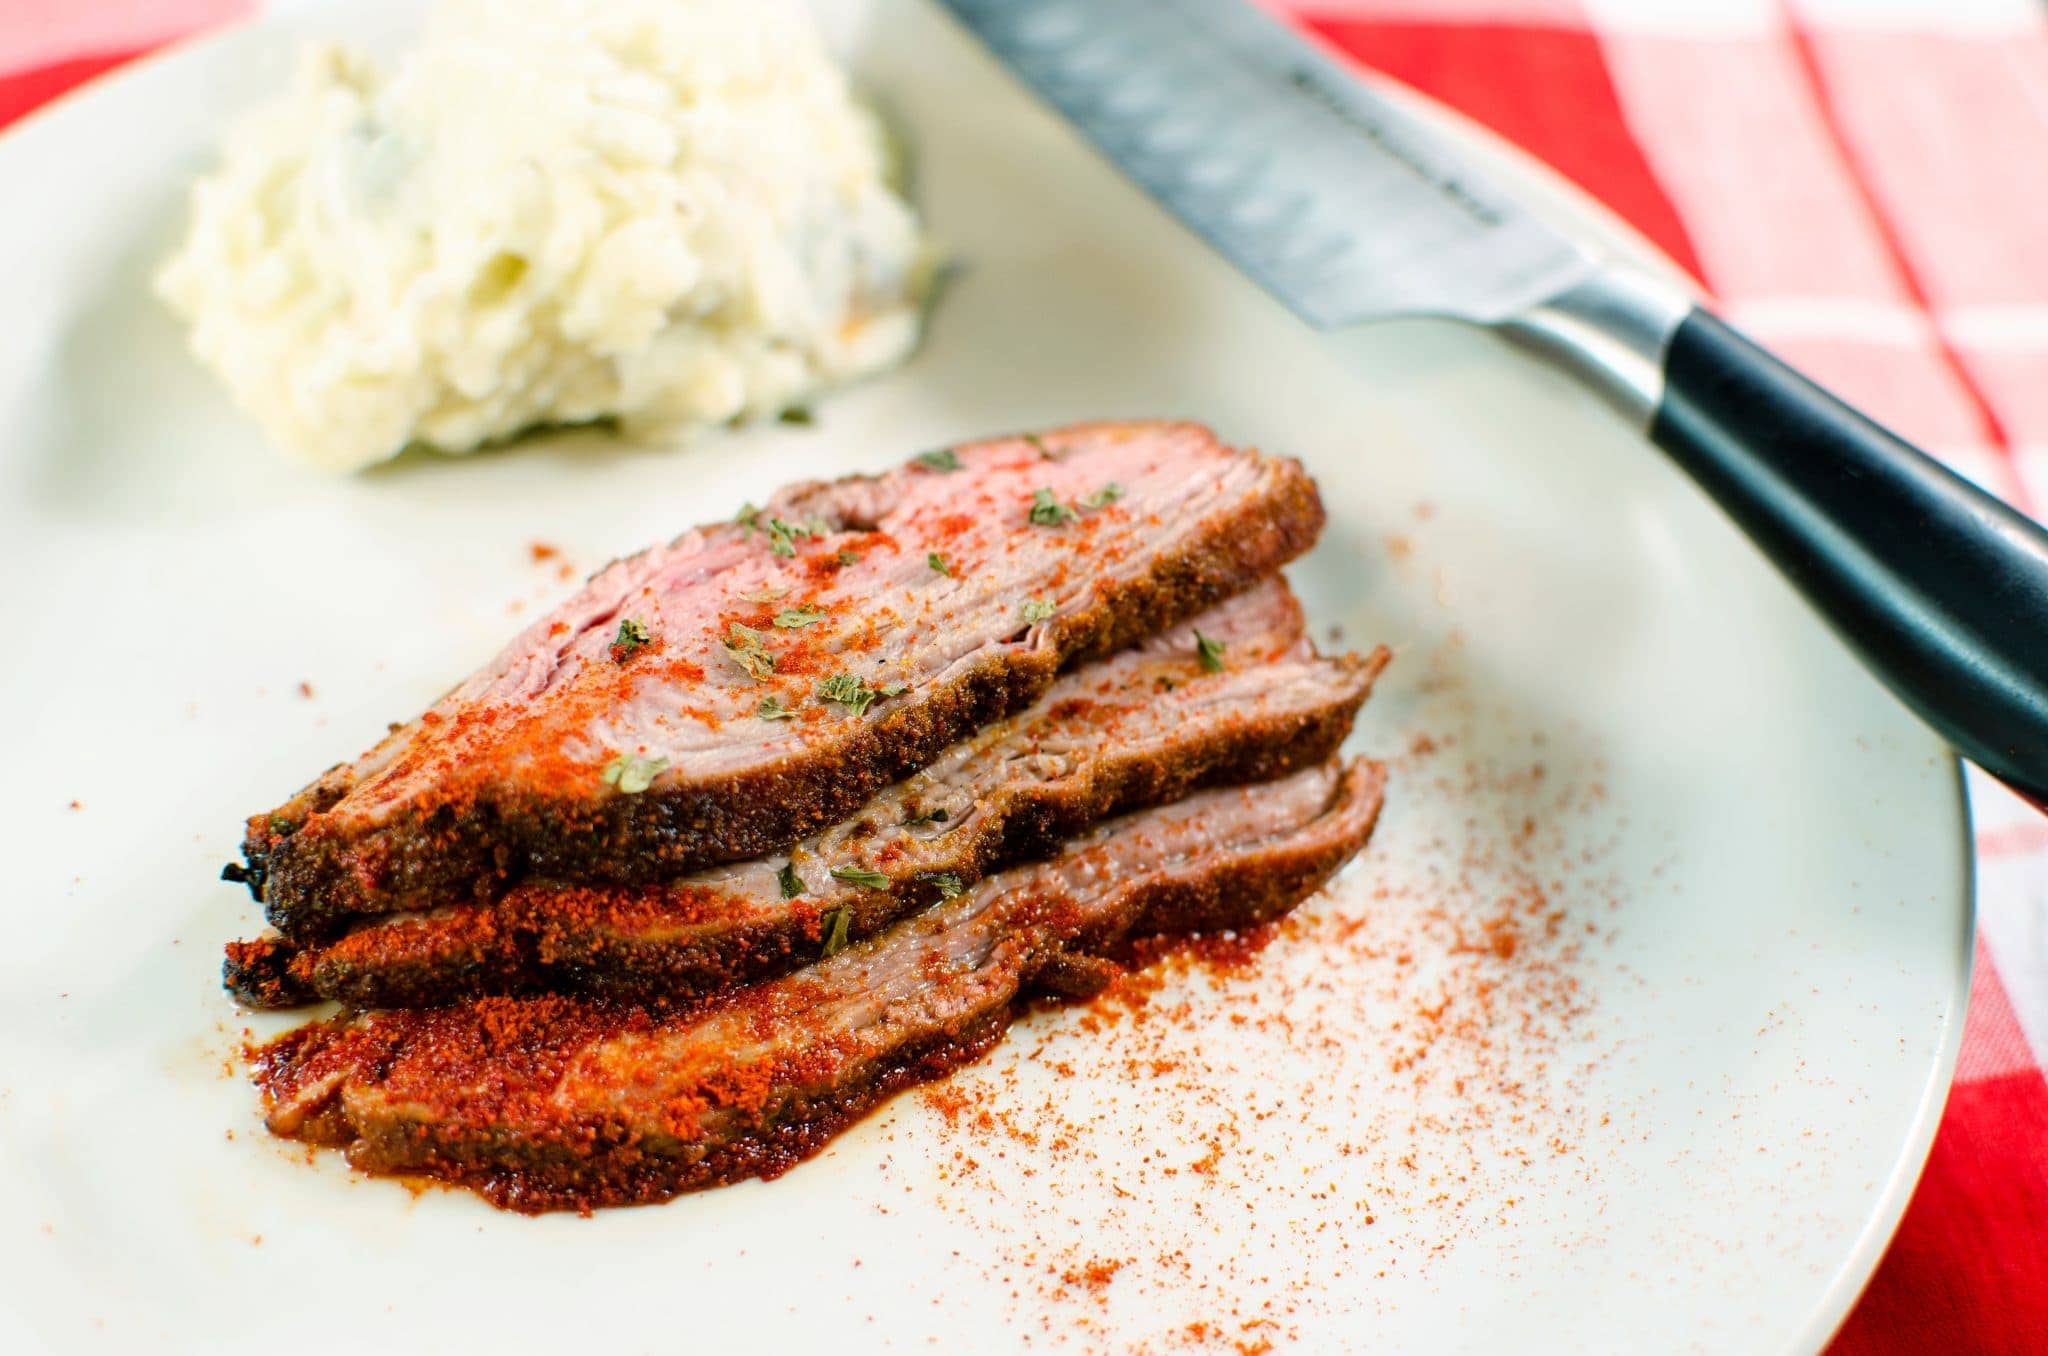 Top view of middle-eastern flank steak on a plate.